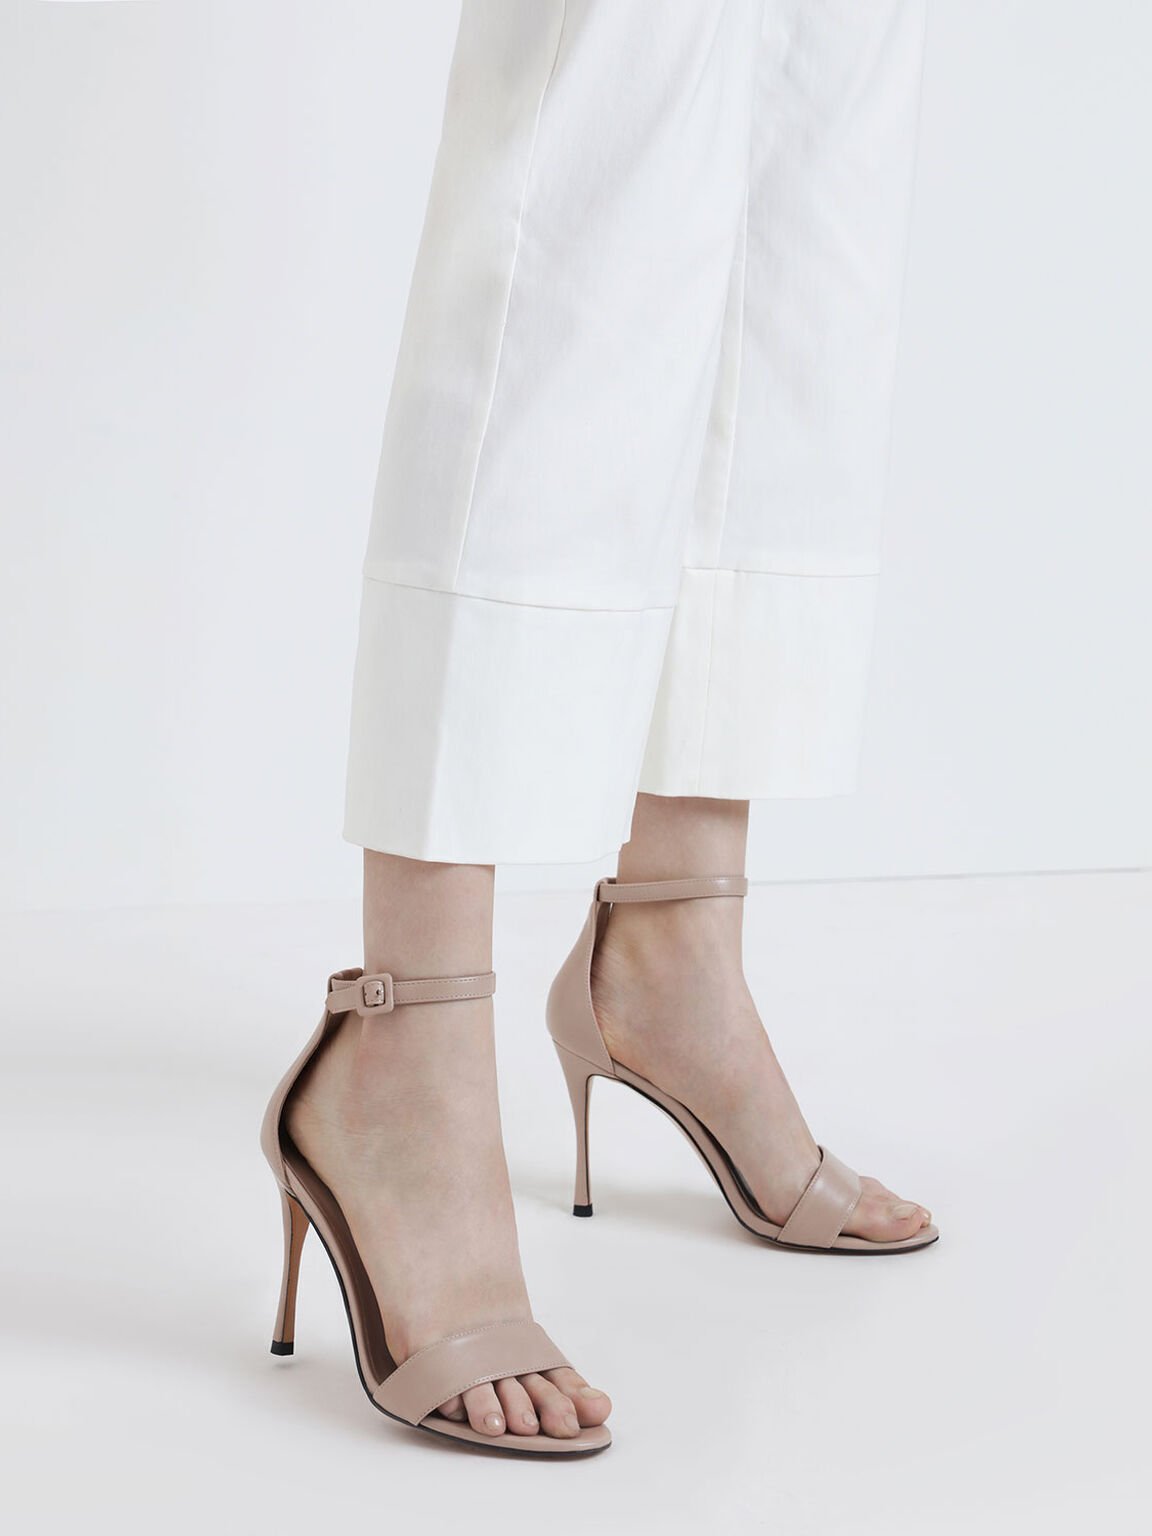 Ankle Strap Stiletto Heels, Nude, hi-res